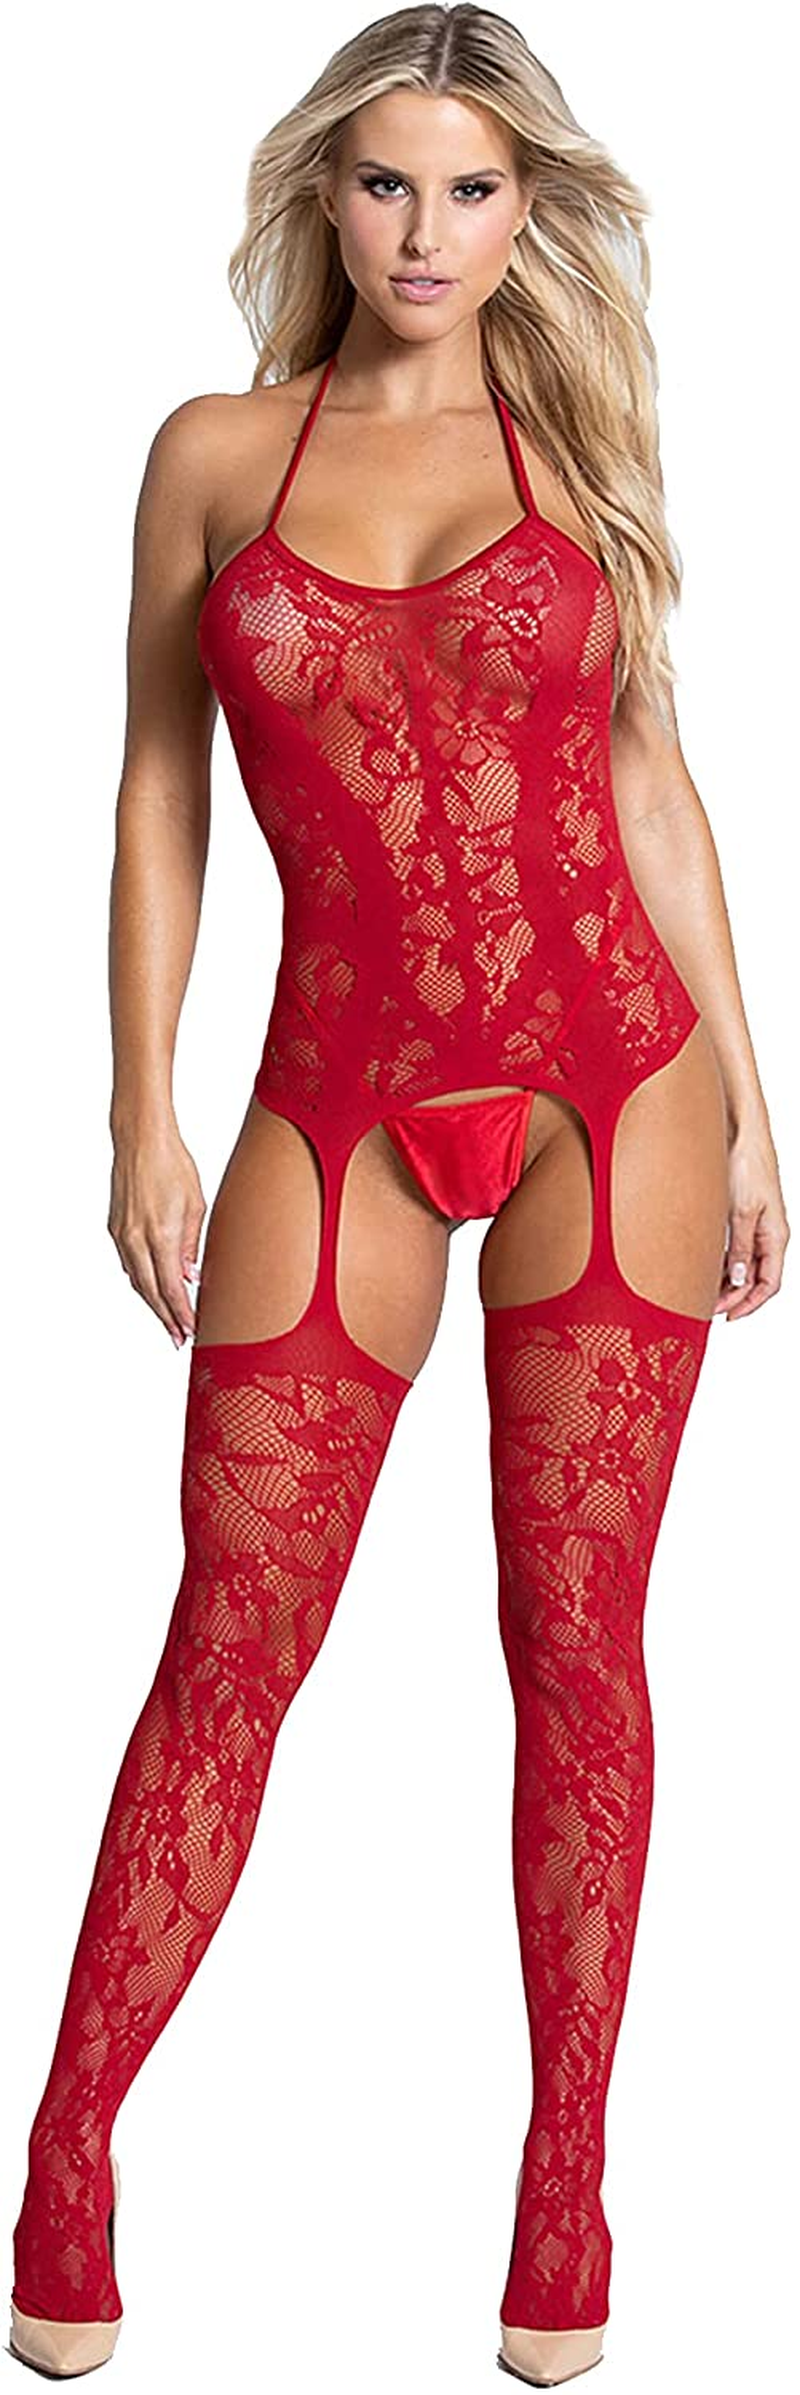 Women's Fishnet Bodystocking Attached Thigh High Stockings - One Size